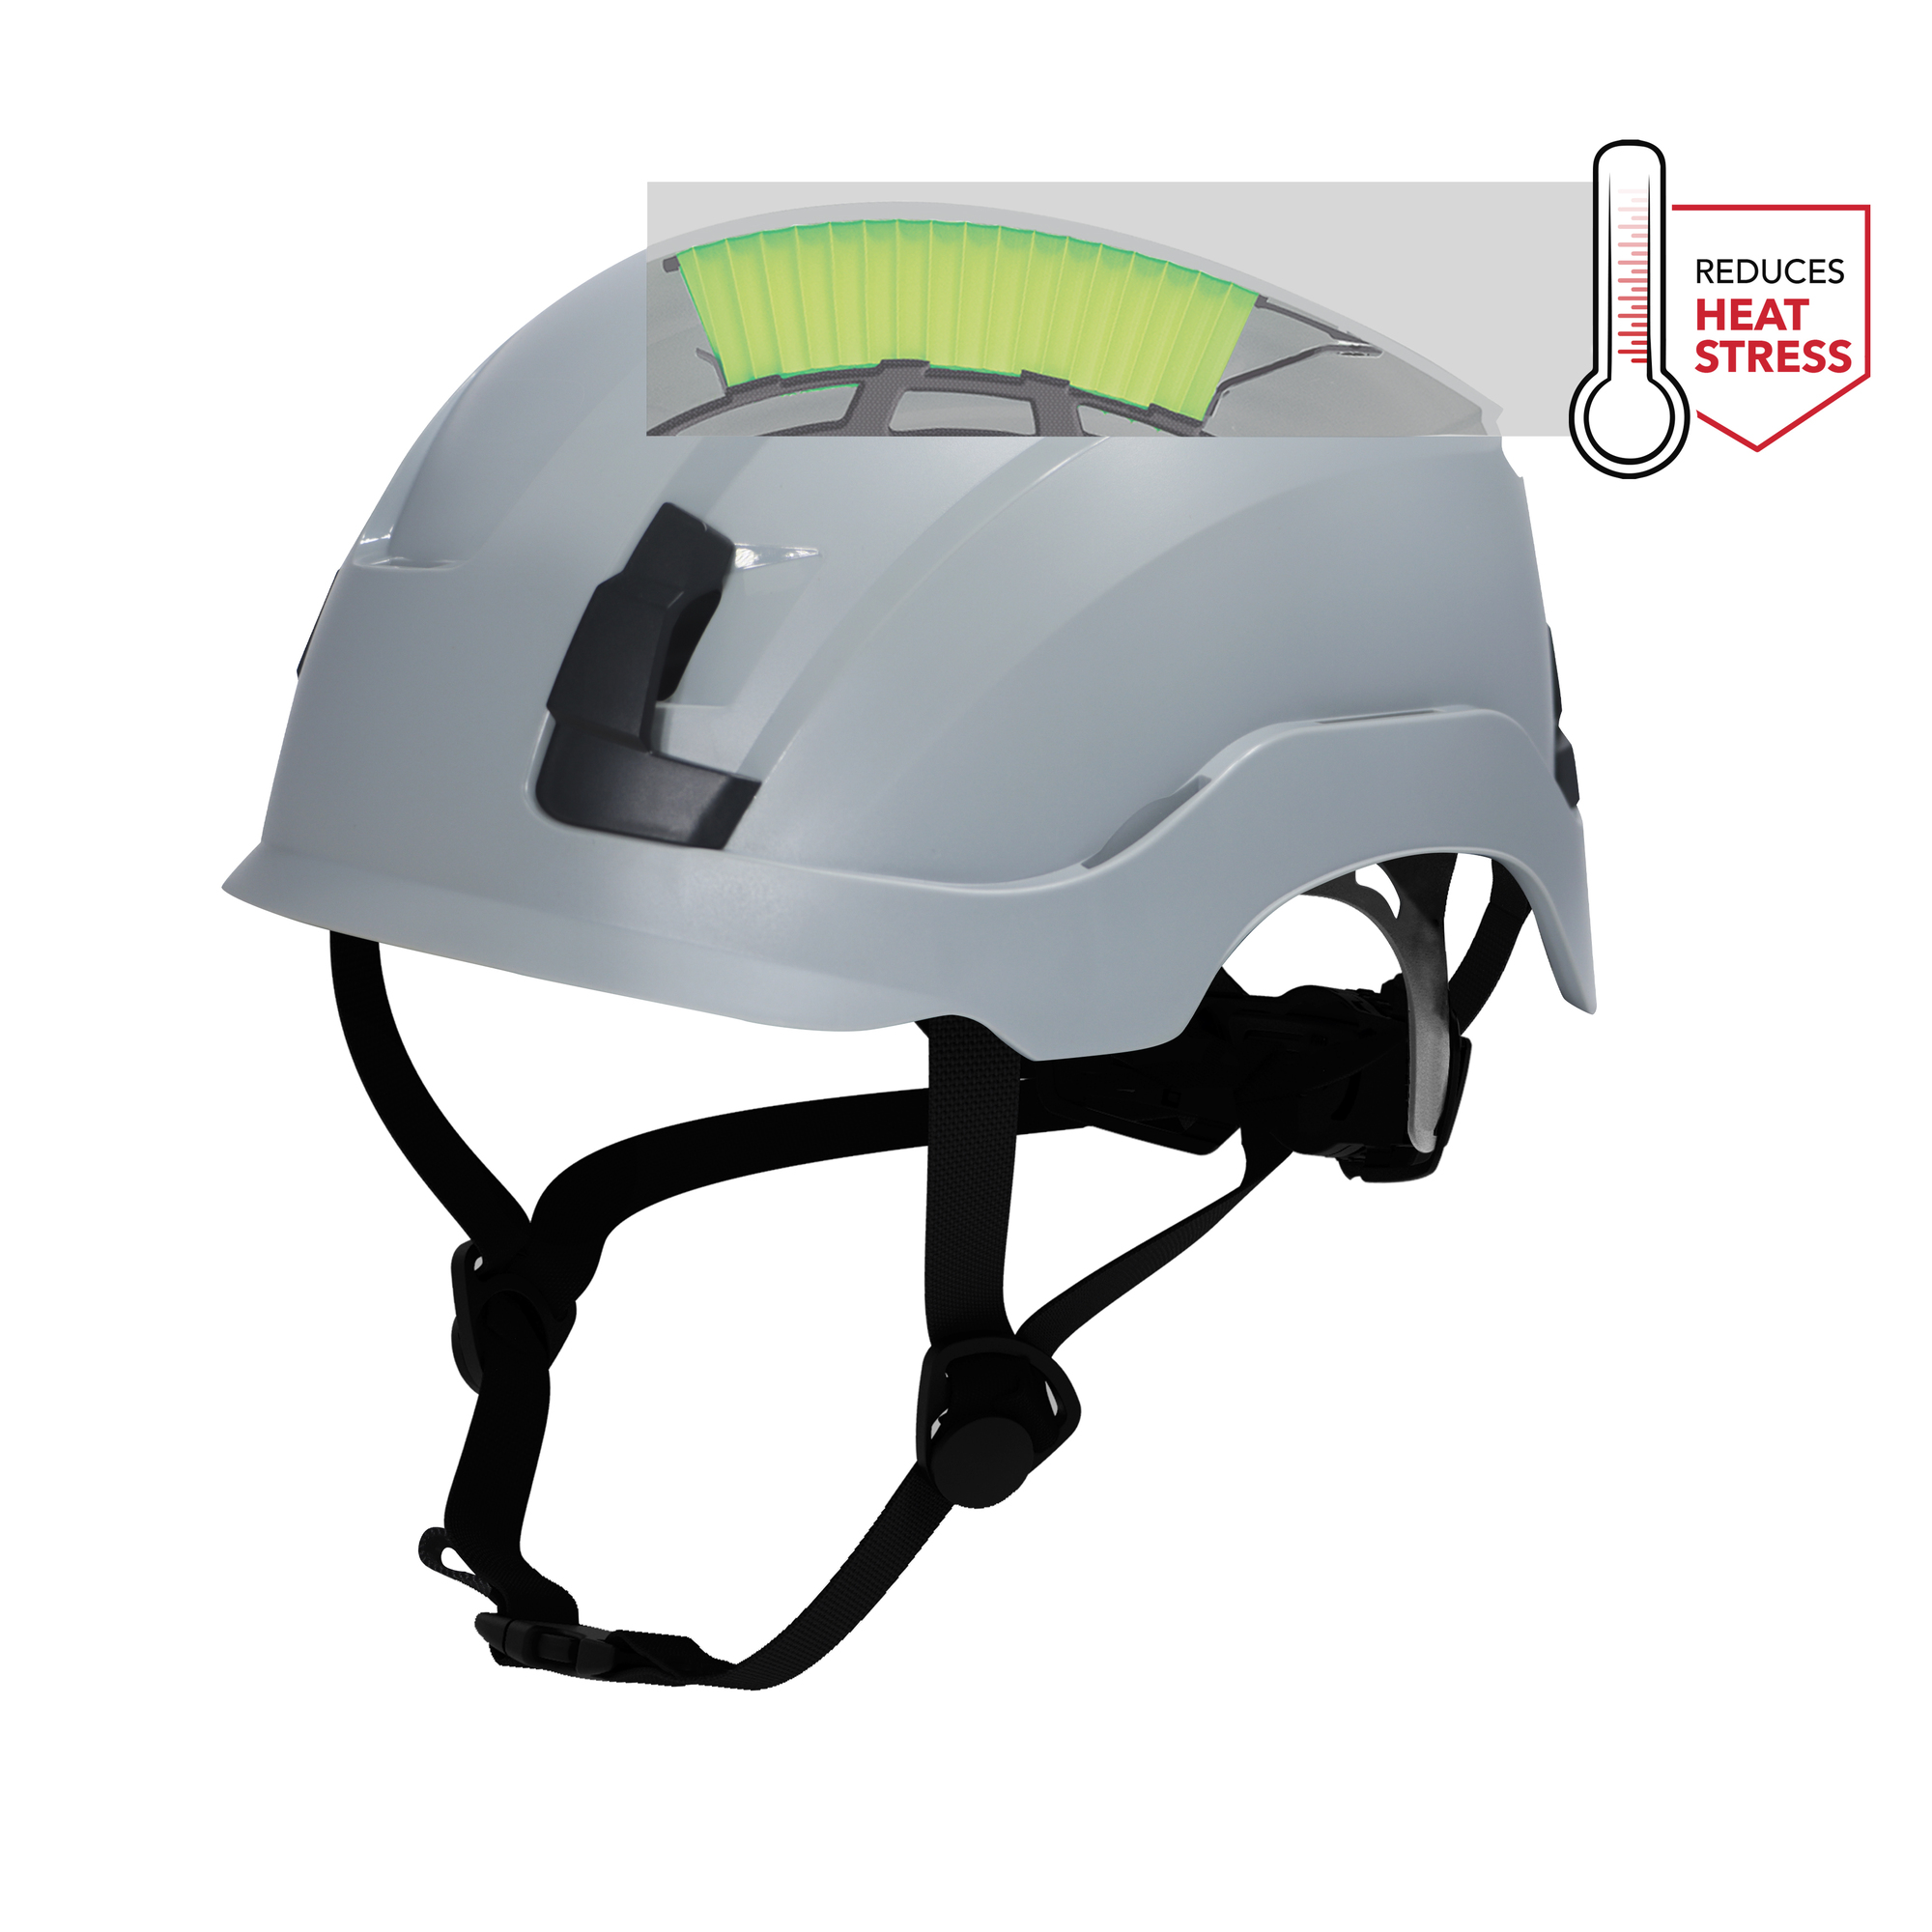 General Electric, Low-Profile Gray GH400 Safety Helmet Vented, Hard Hat Style Helmet, Hat Size Adjustable, Color Gray, Model GH400G